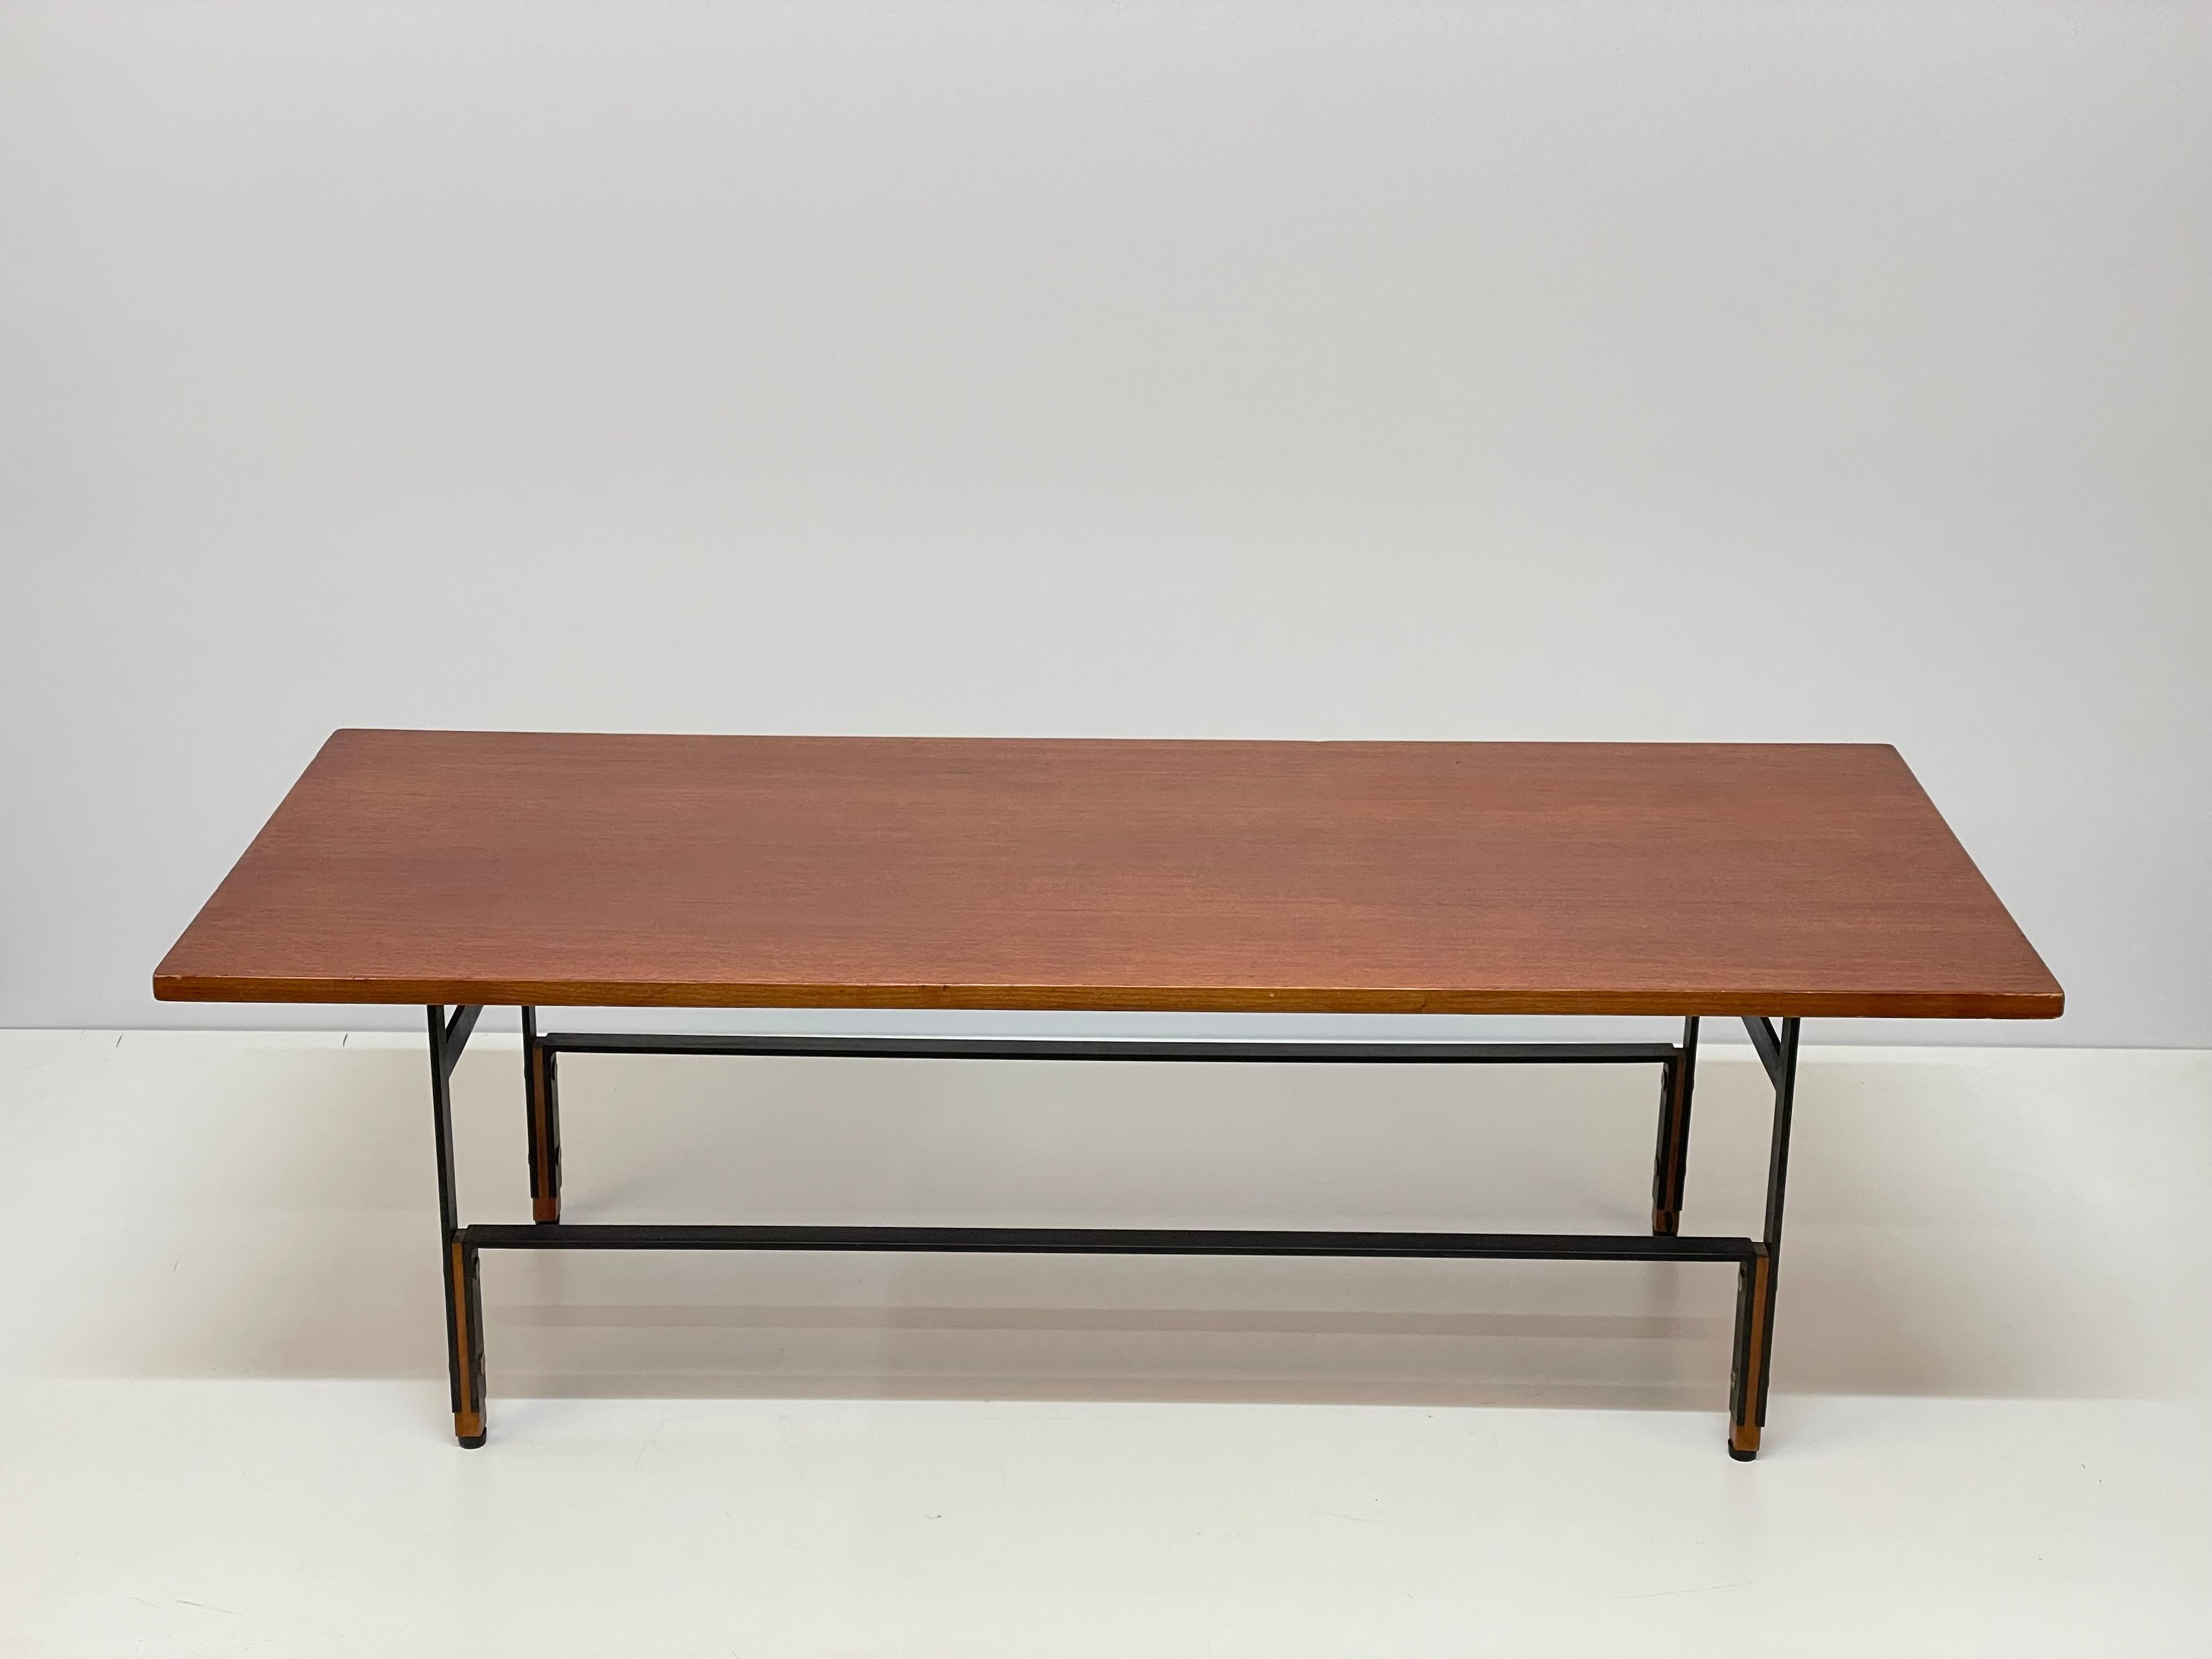 Midcentury Teak, Enamelled Iron and Brass Italian Coffee Table, 1960s For Sale 4